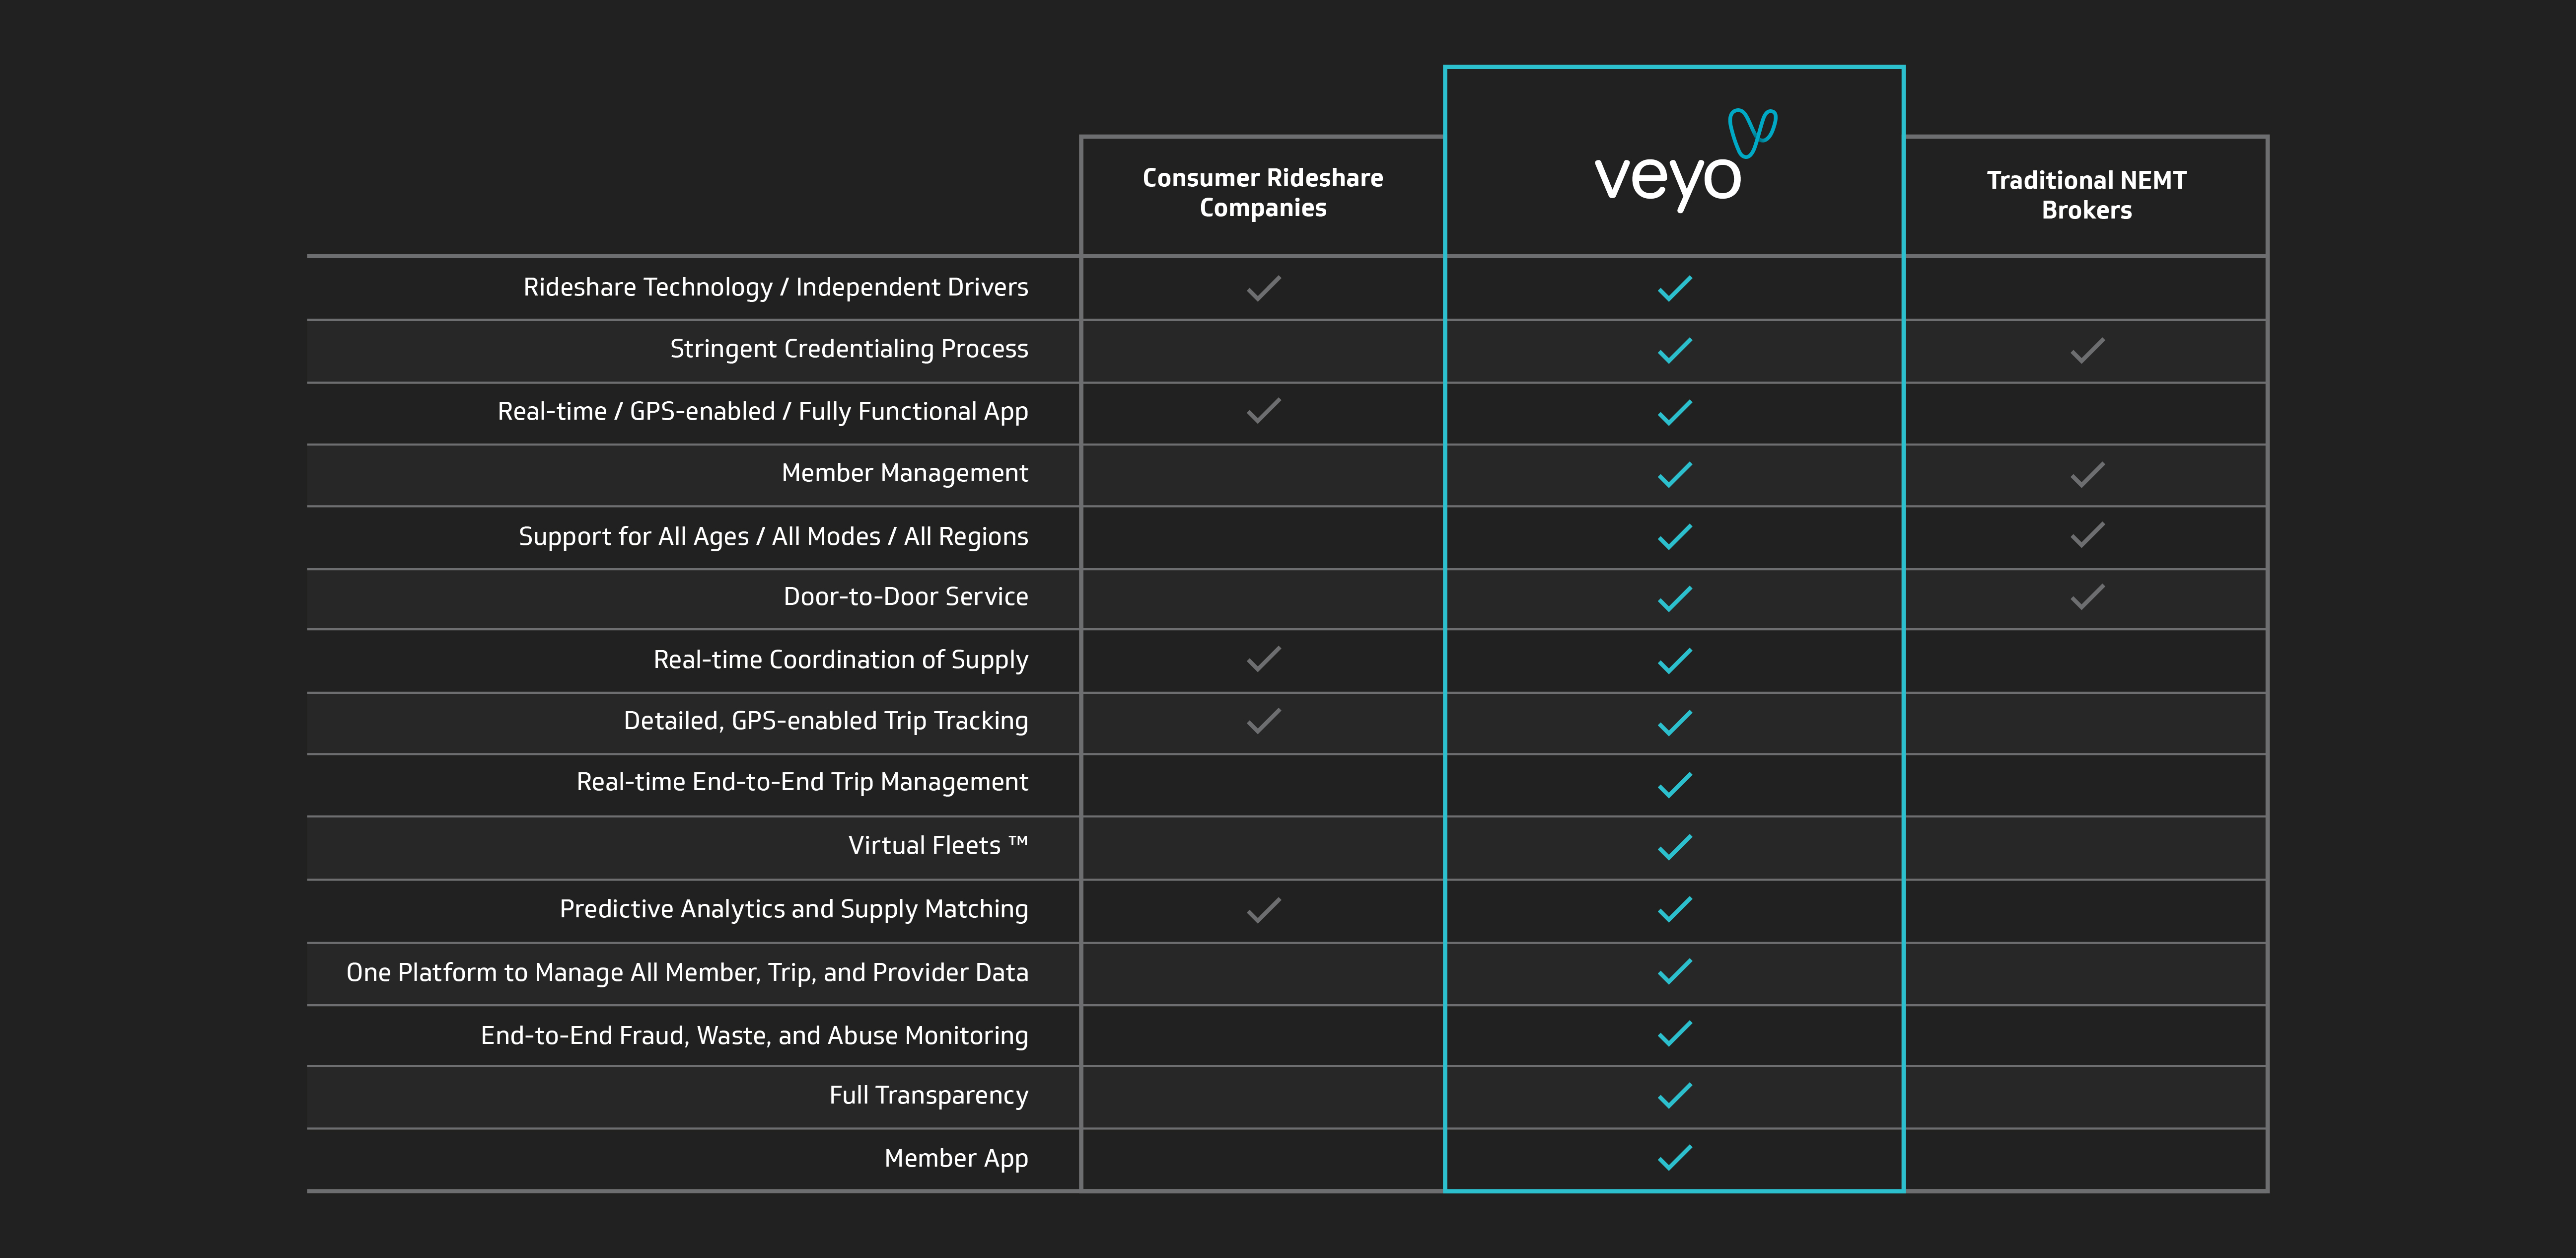 How does Veyo compare to rideshare companies?